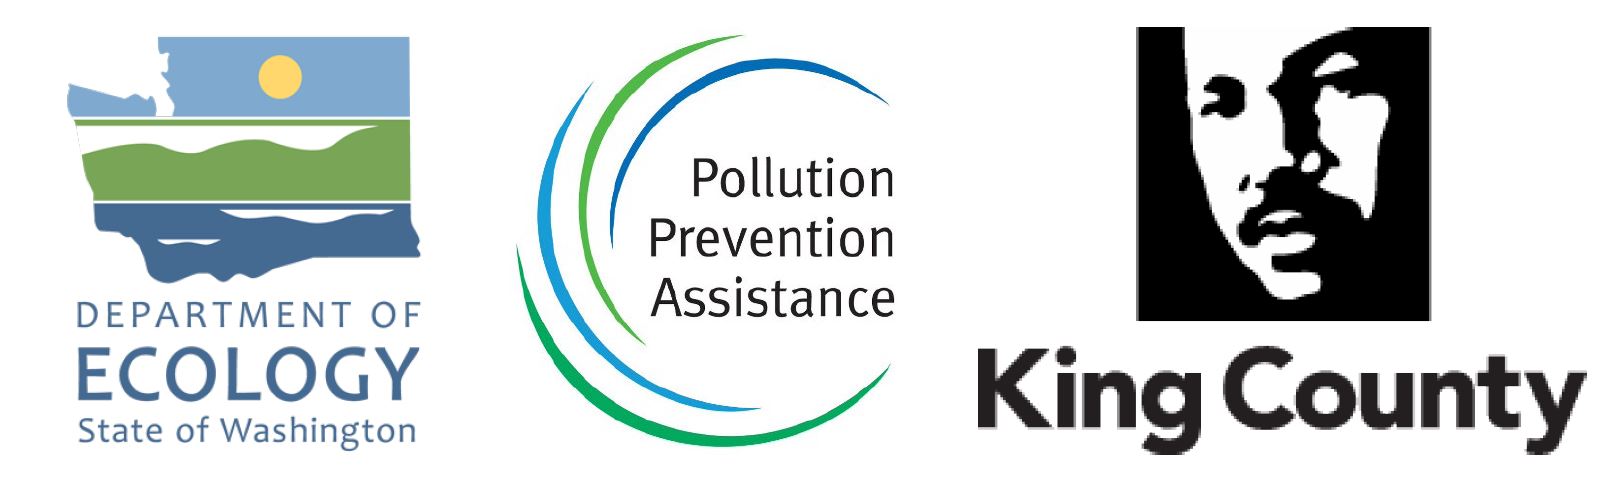 The Washington State Department of Ecology, Pollution Prevention Assistance, and King County logos.